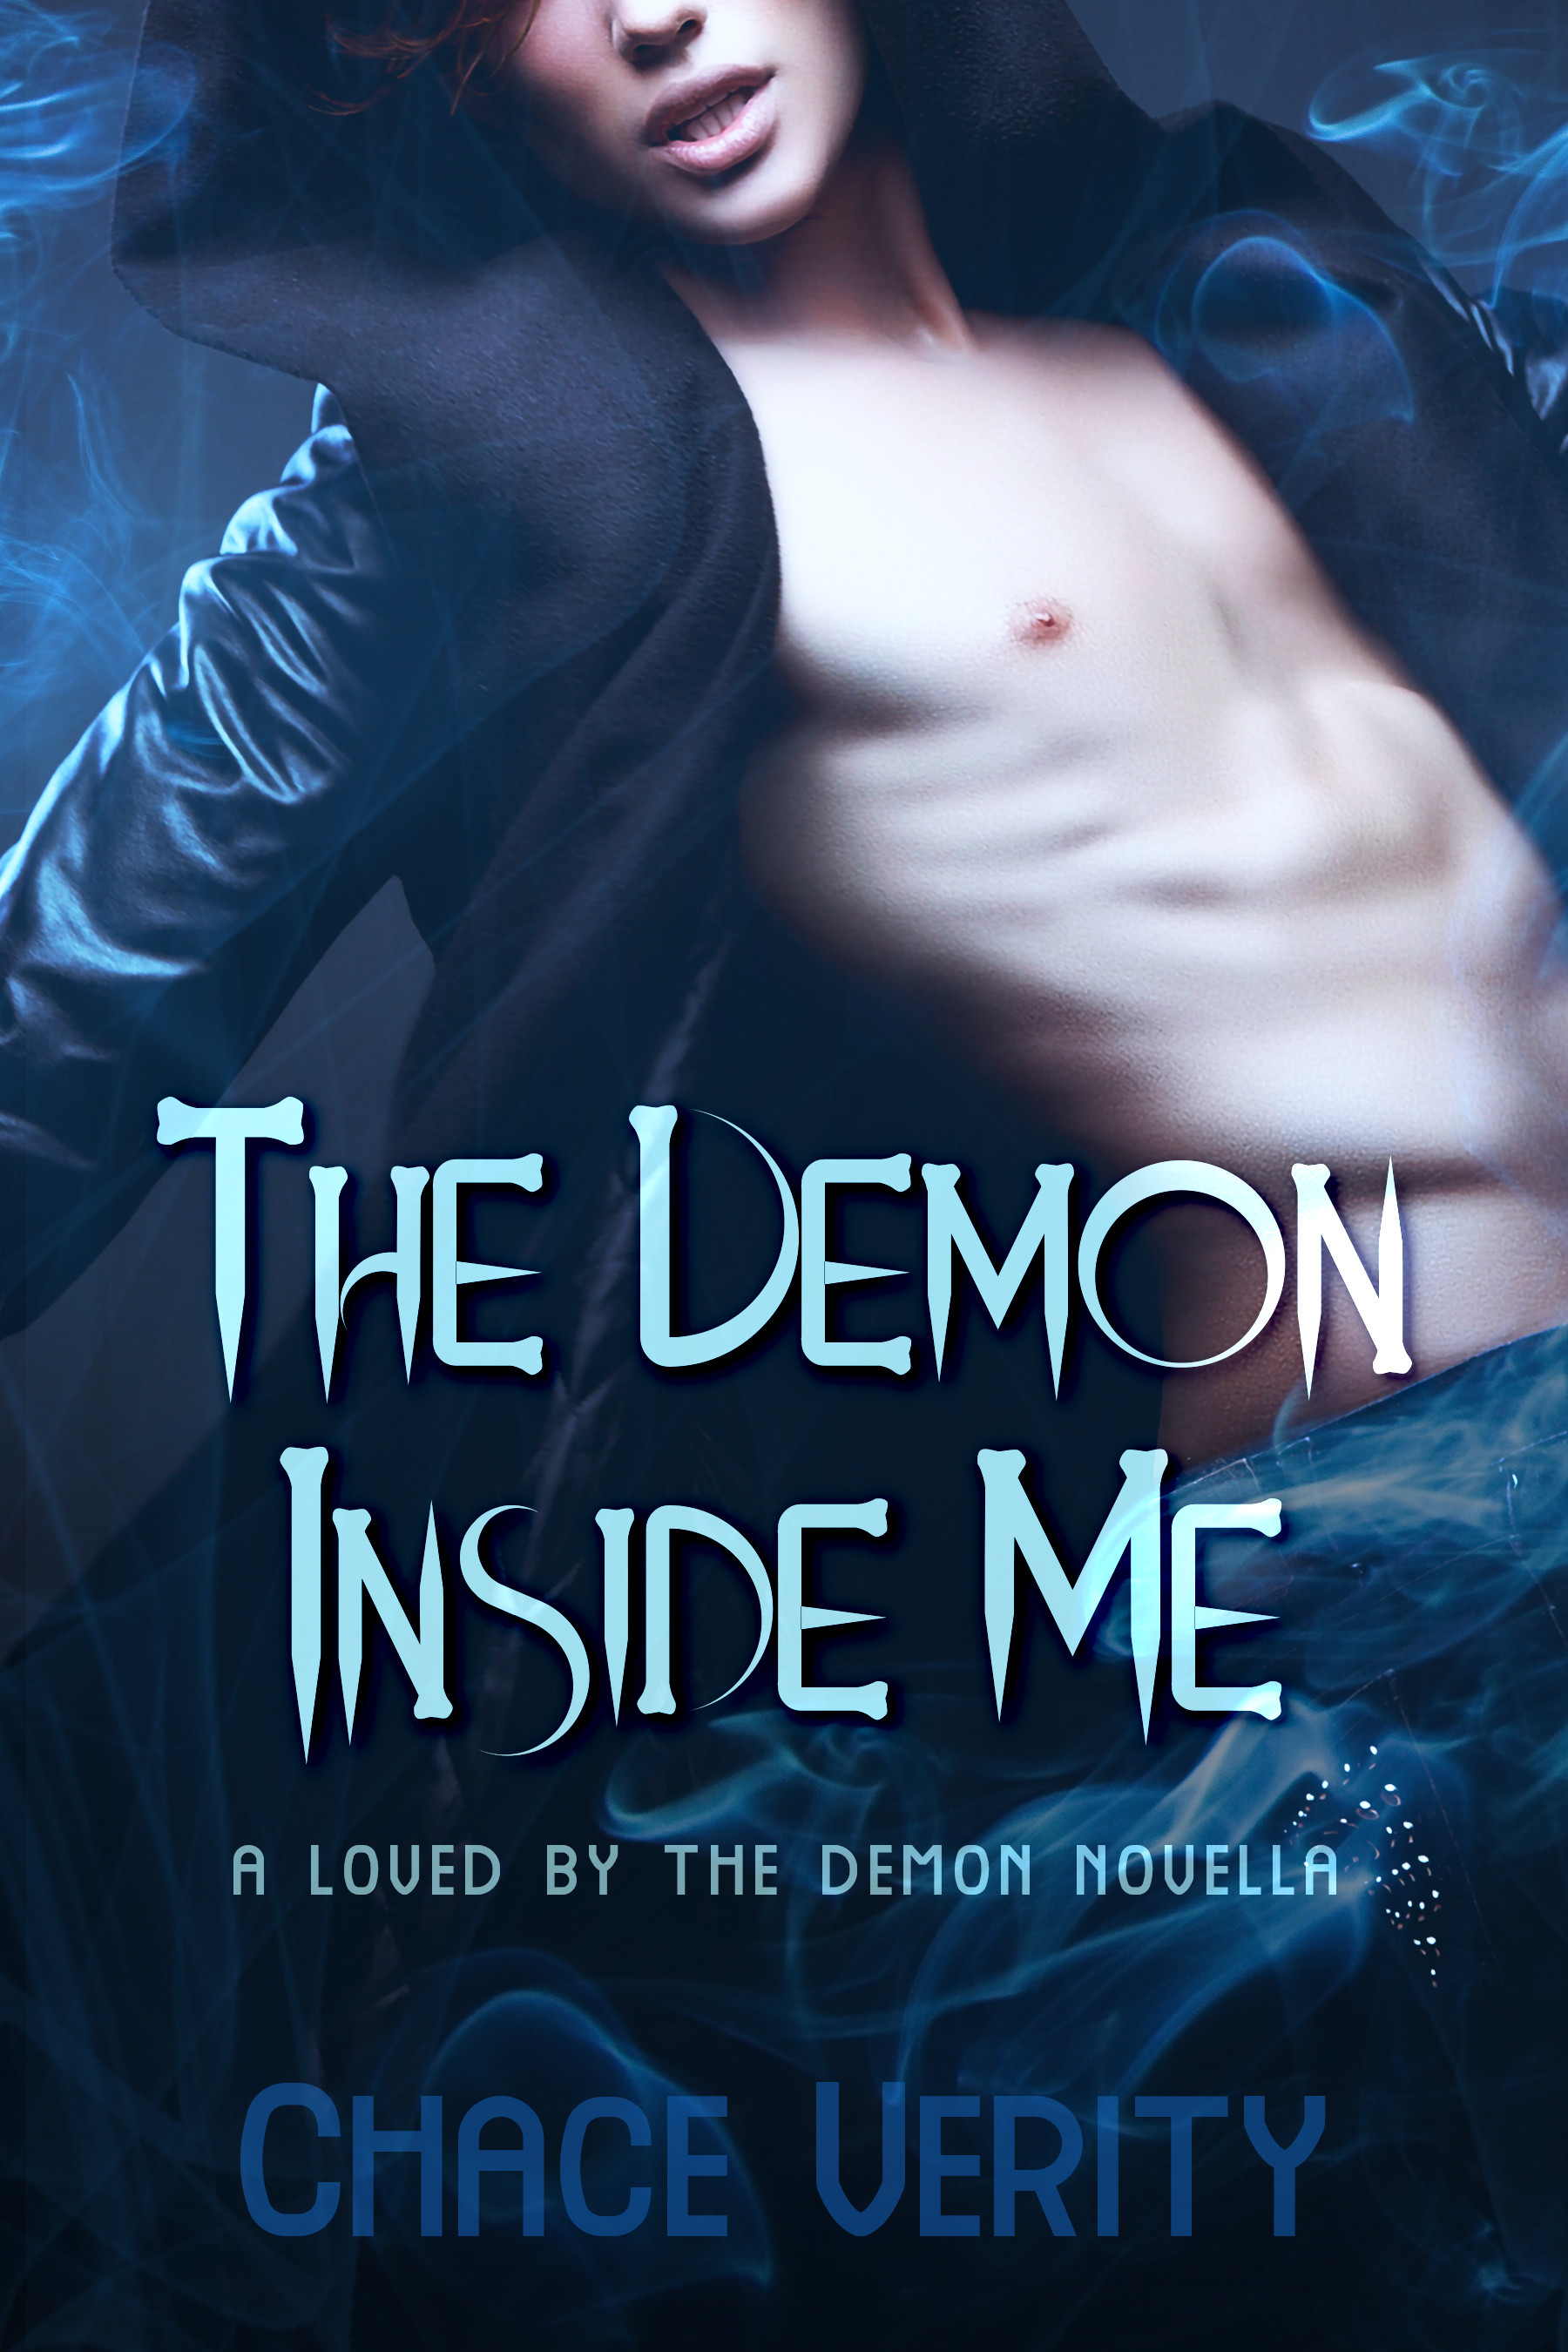 Cover for Chace Verity's <i>The Demon Inside Me</i> featuring a shirtless man wearing a hooded jacket surrounded by atmospheric smoke